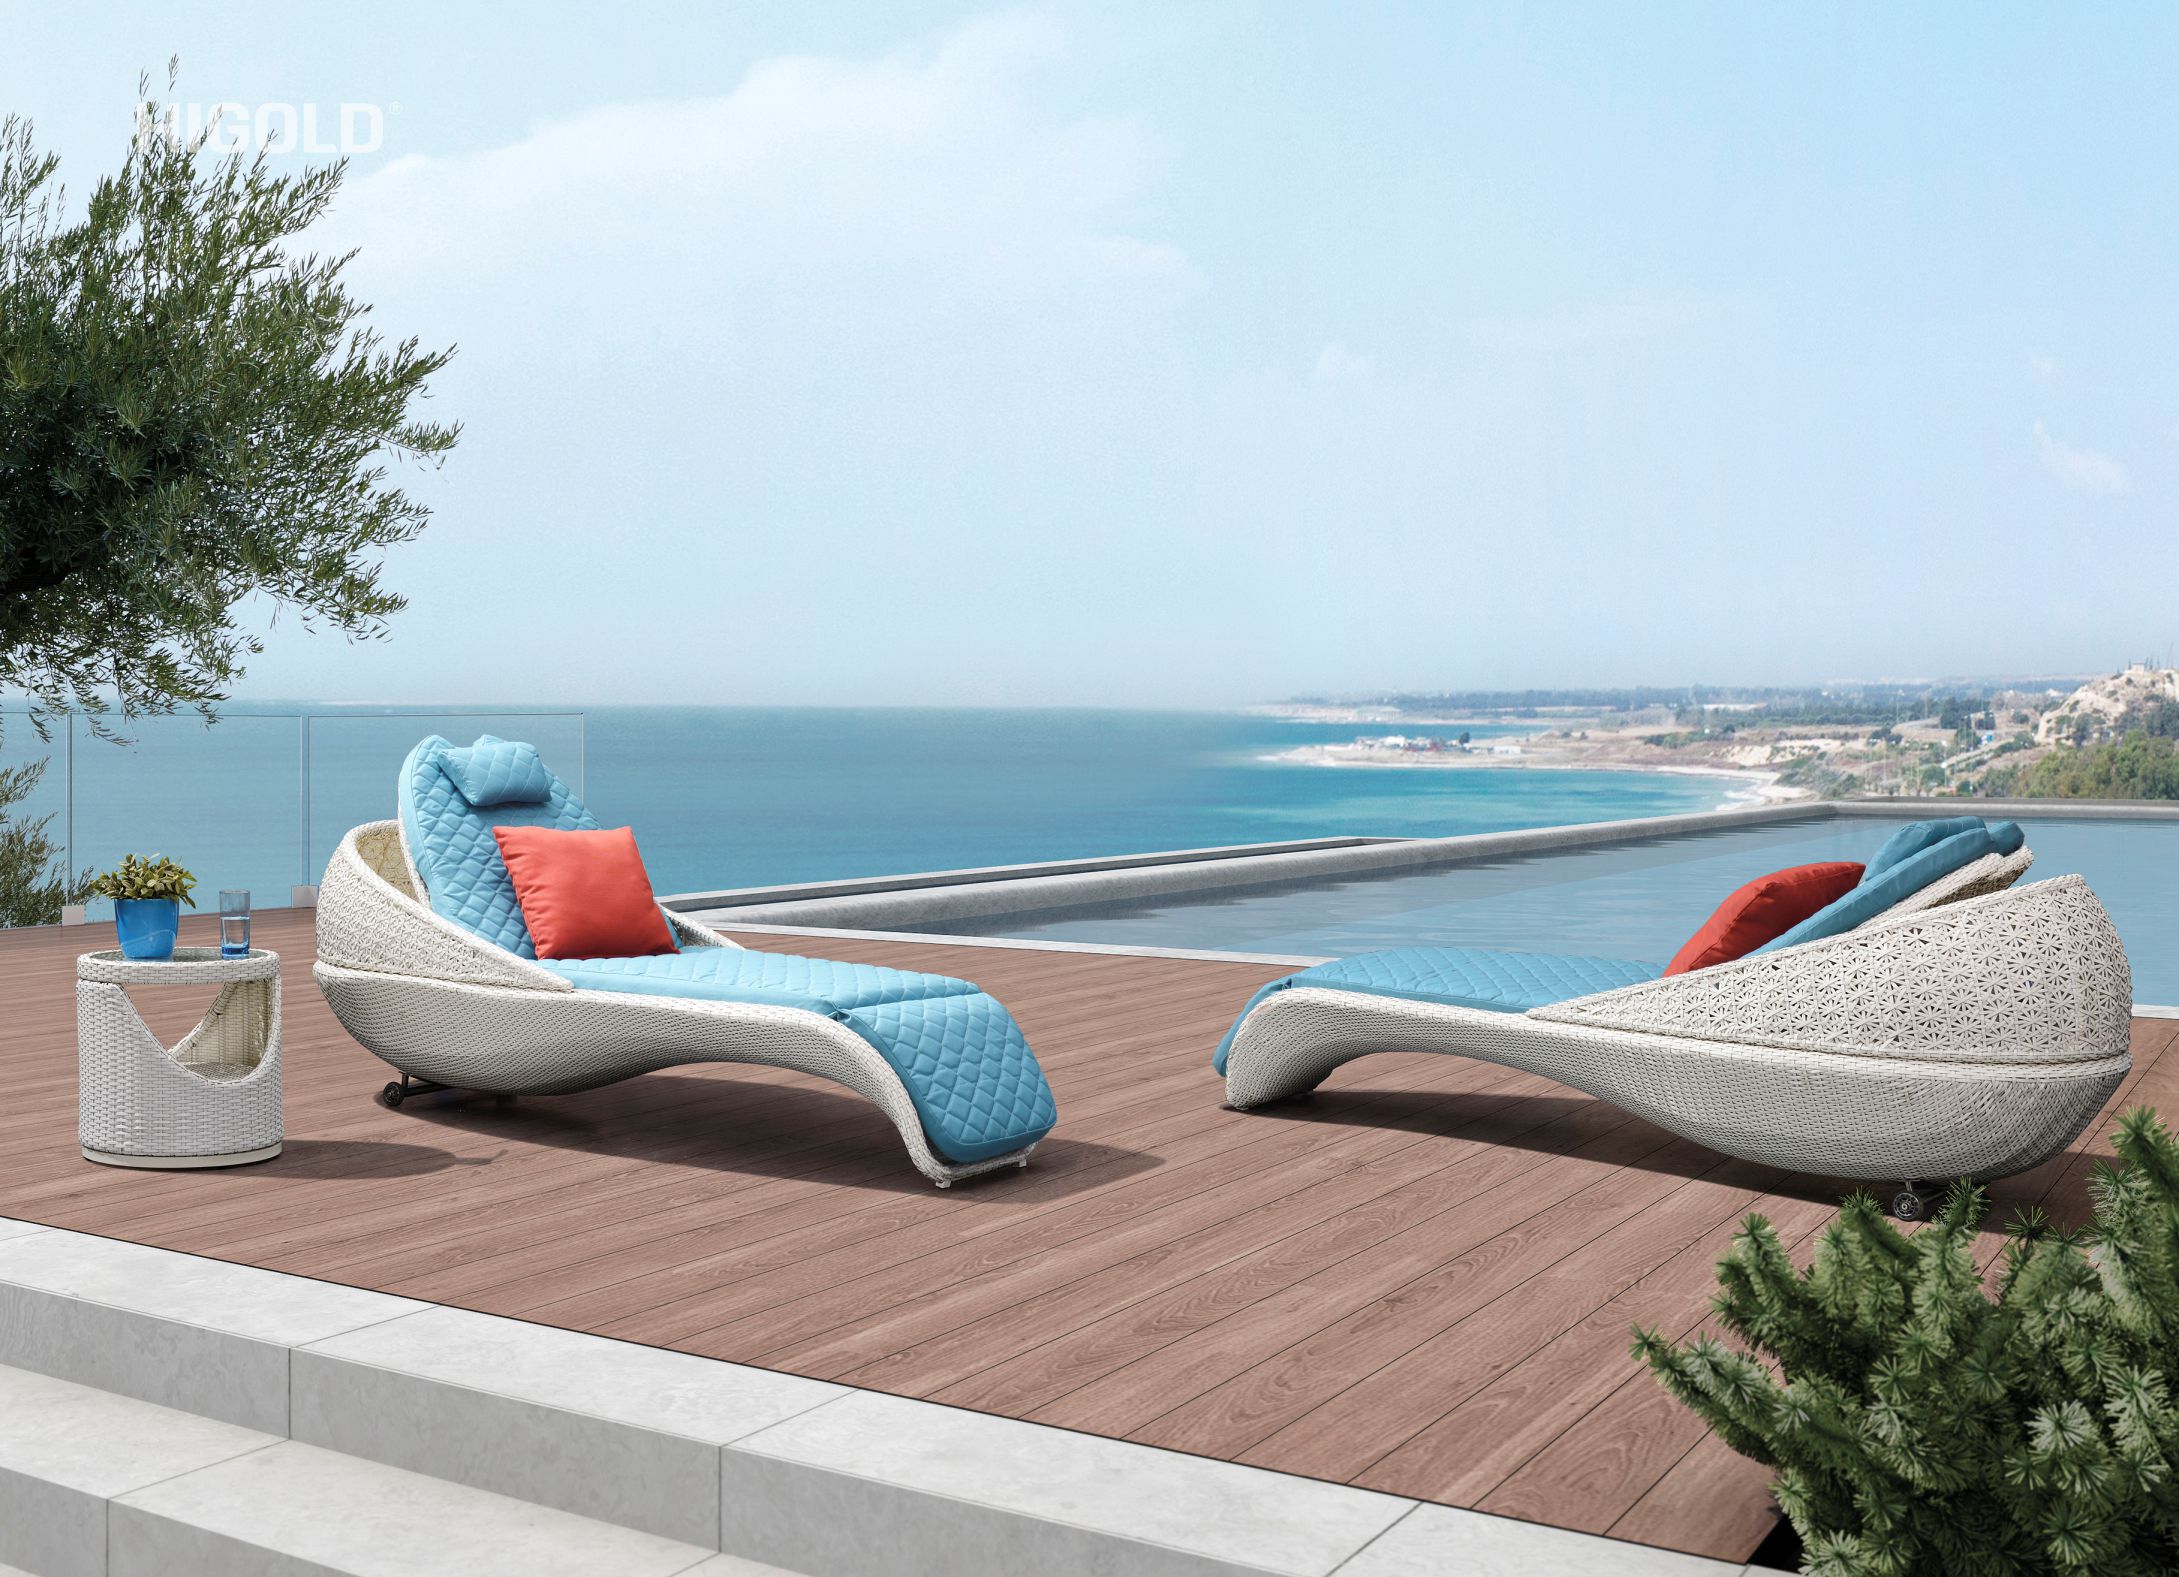 Tulip large daybed for outdoor